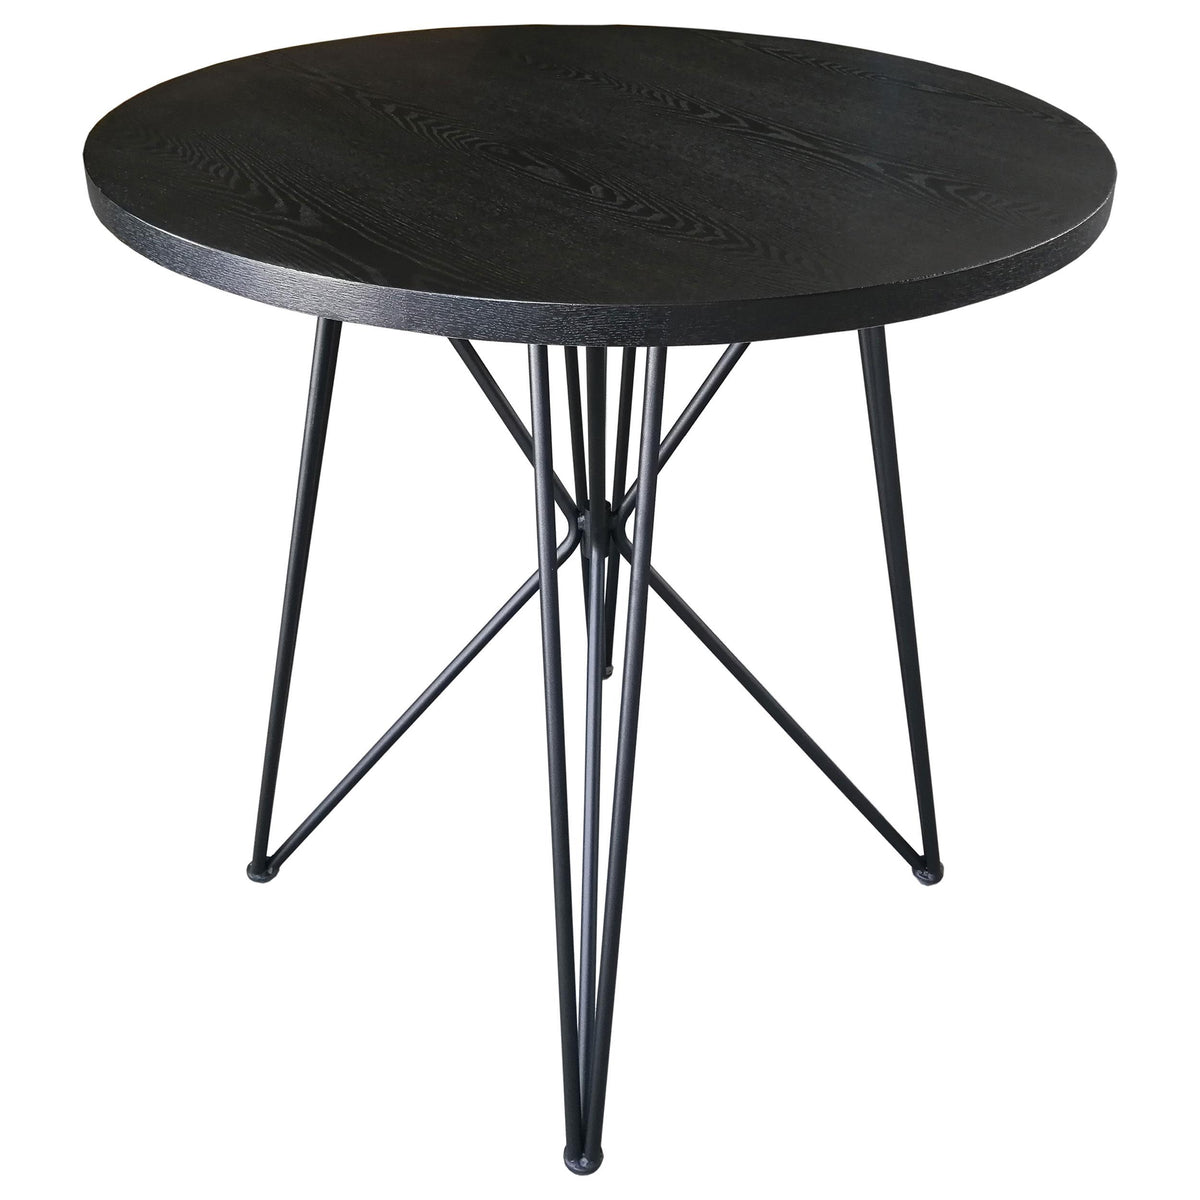 Rennes Round Table Black and Gunmetal Rennes Round Table Black and Gunmetal Half Price Furniture